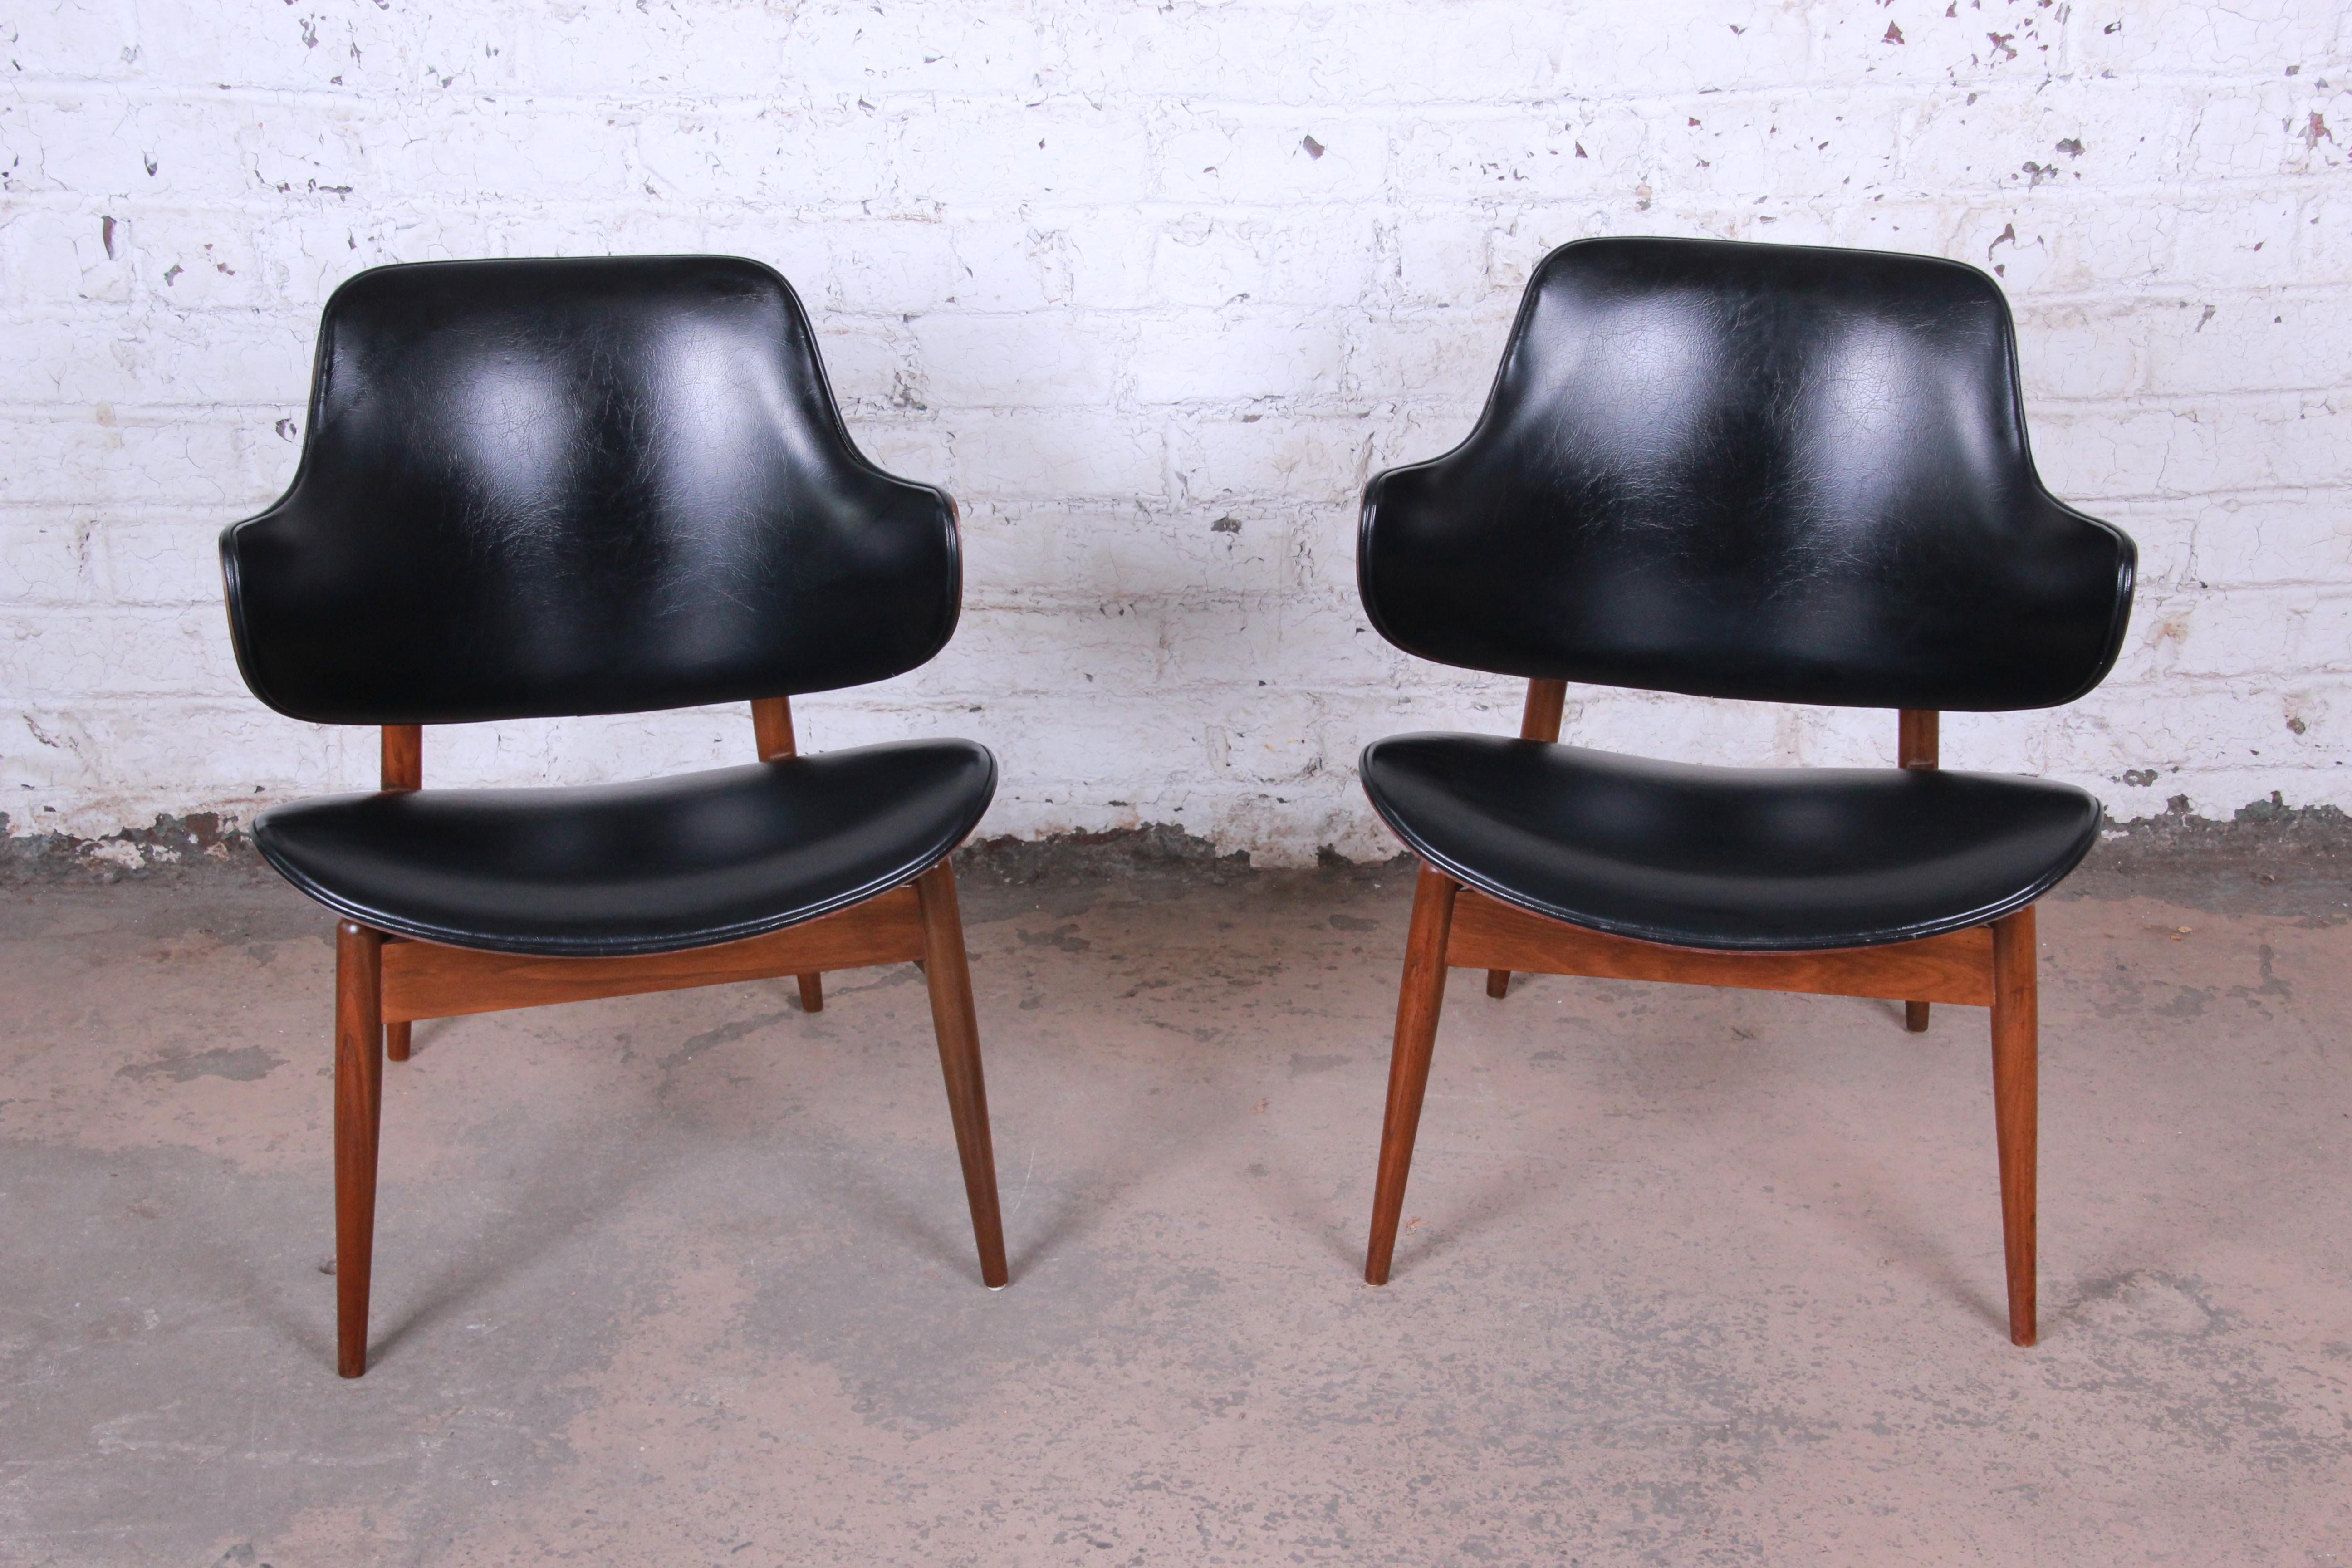 An exceptional pair of Mid-Century Modern club chairs designed by Seymour James Wiener for Kodawood. The chairs feature a stylish sculptural design, with clam shell backs and seats. The walnut frames have gorgeous wood grain, and the original vinyl